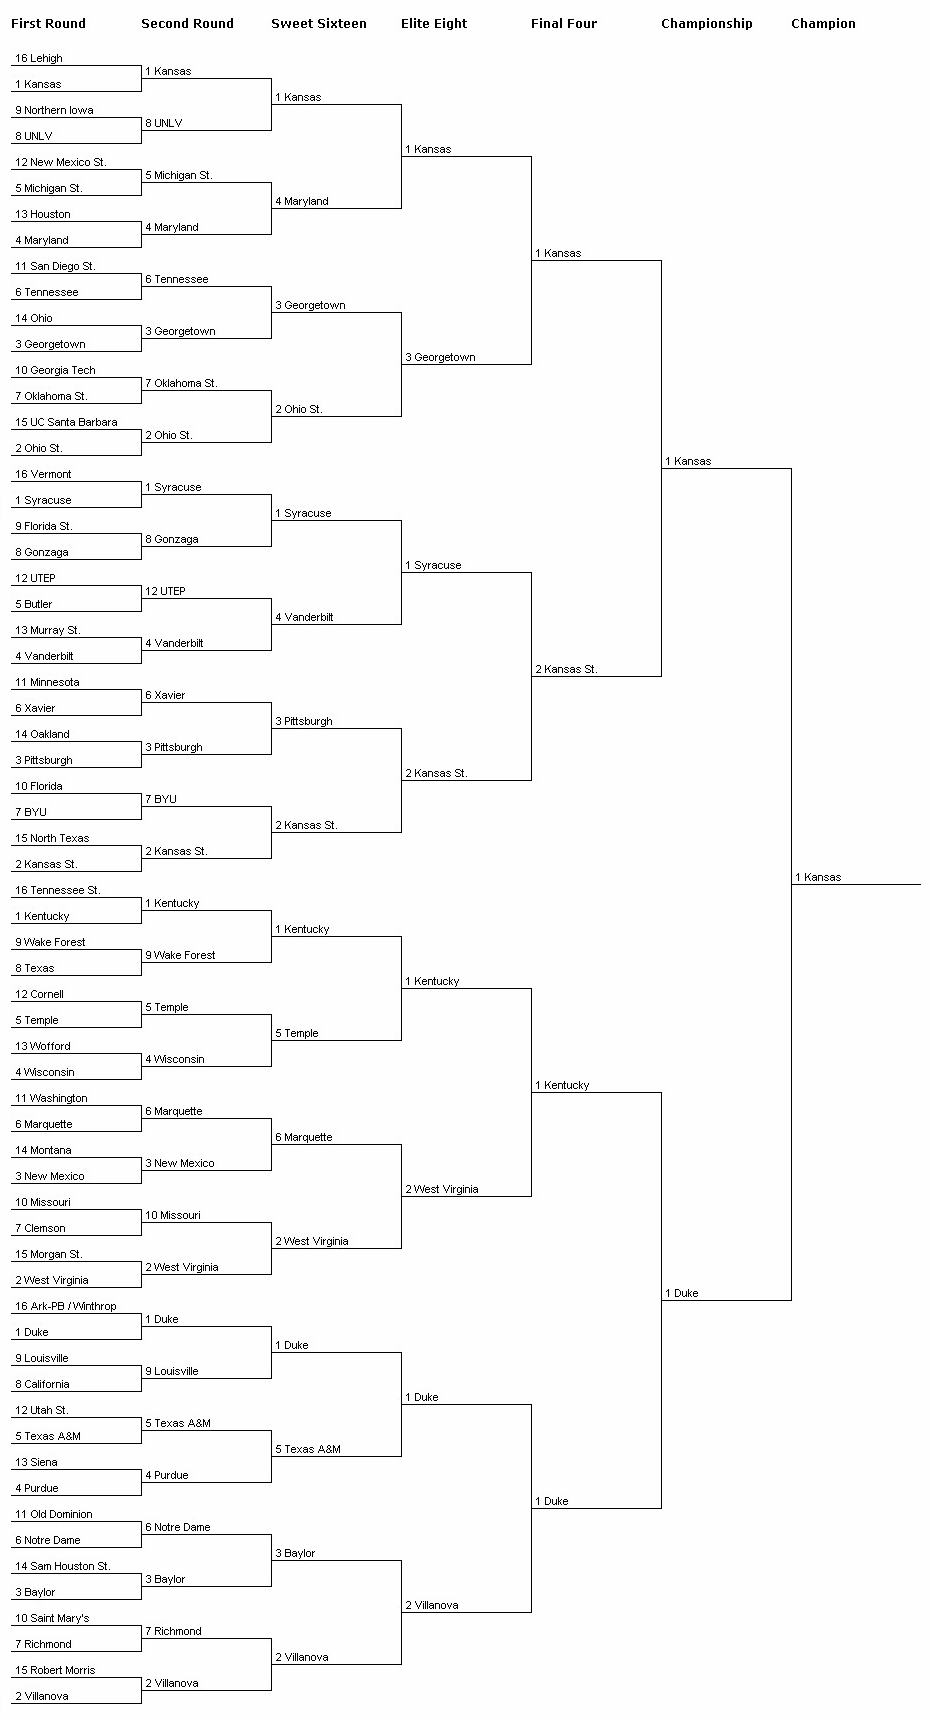 2010 March Madness Bracket Predictions